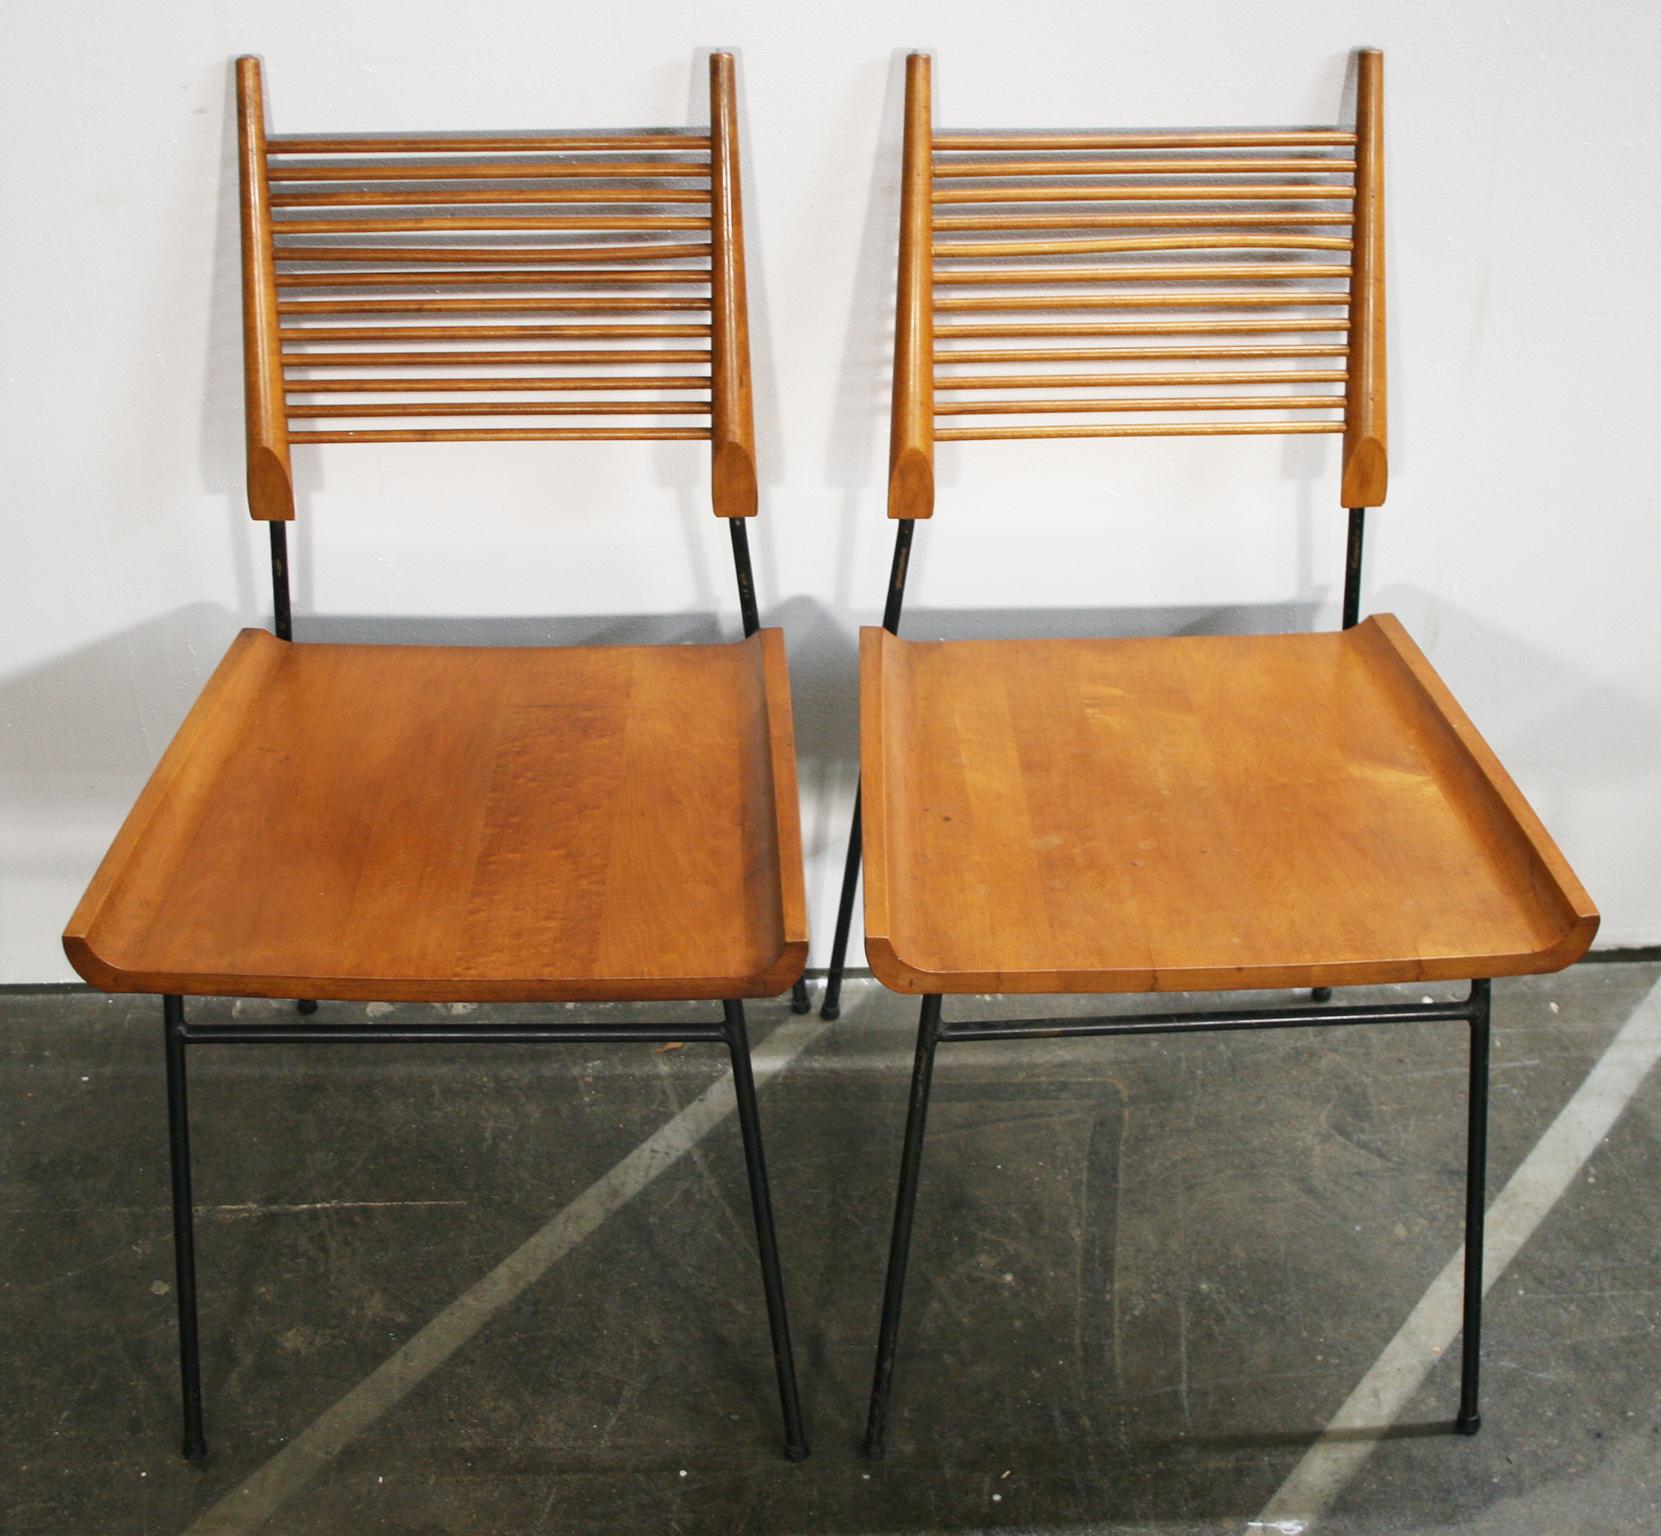 Pair of original rare midcentury Maple Paul McCobb planner group #1533 shovel side dining chairs. Solid maple seat and spindle back on Iron base. Original vintage condition. Original medium brown Tobacco finish. These chairs are marked Paul McCobb